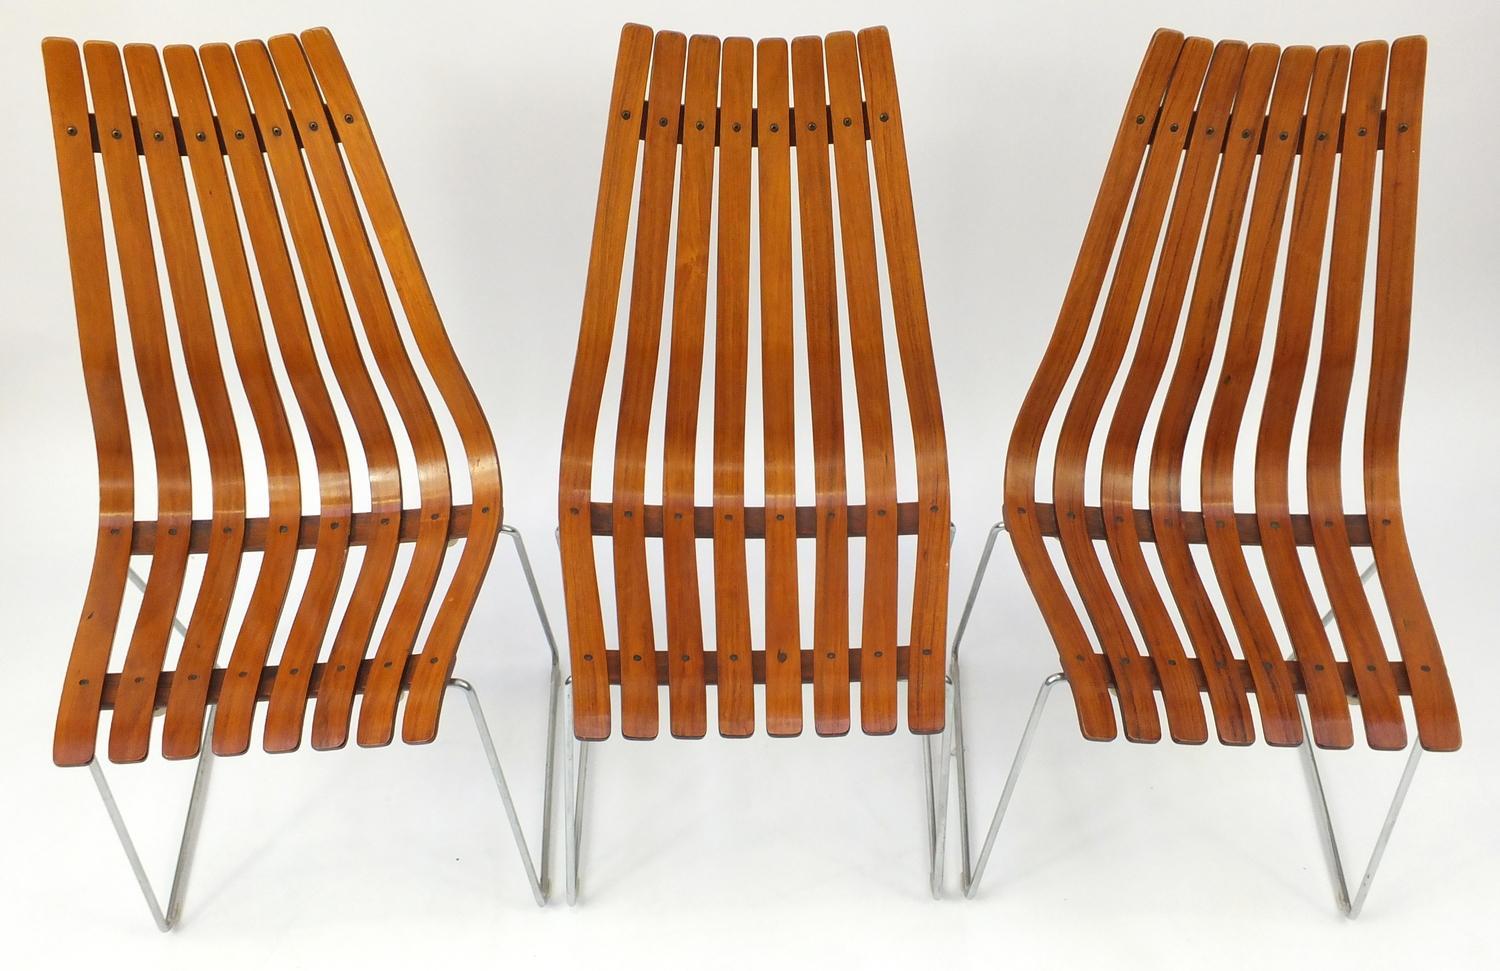 Hans Brattrud Rosewood Dining Table & Six Scandia Chairs, Hove Mobler circa 1965 (Mitte des 20. Jahrhunderts)